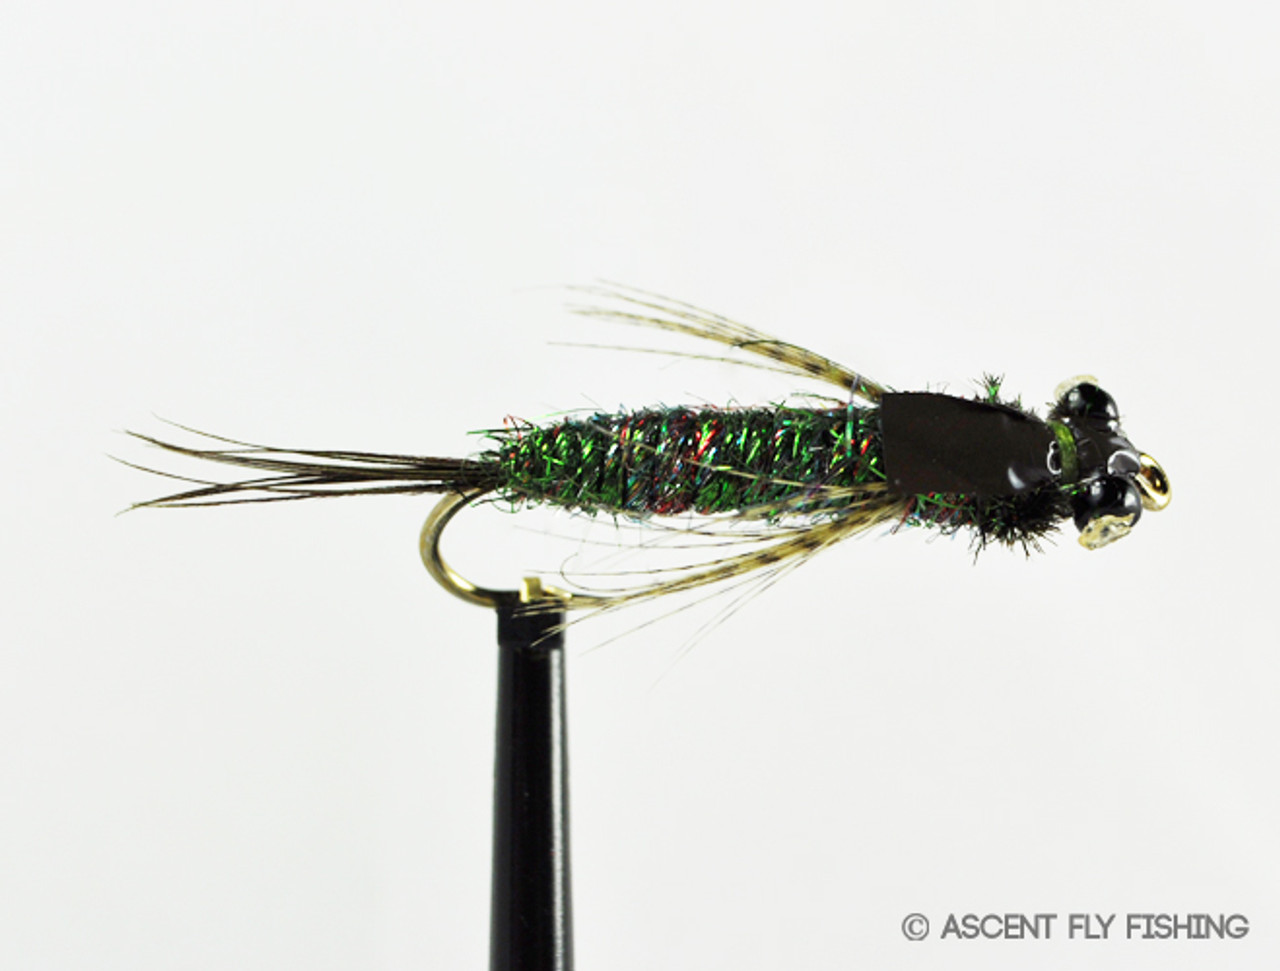 Dragonfly Larva - Ascent Fly Fishing